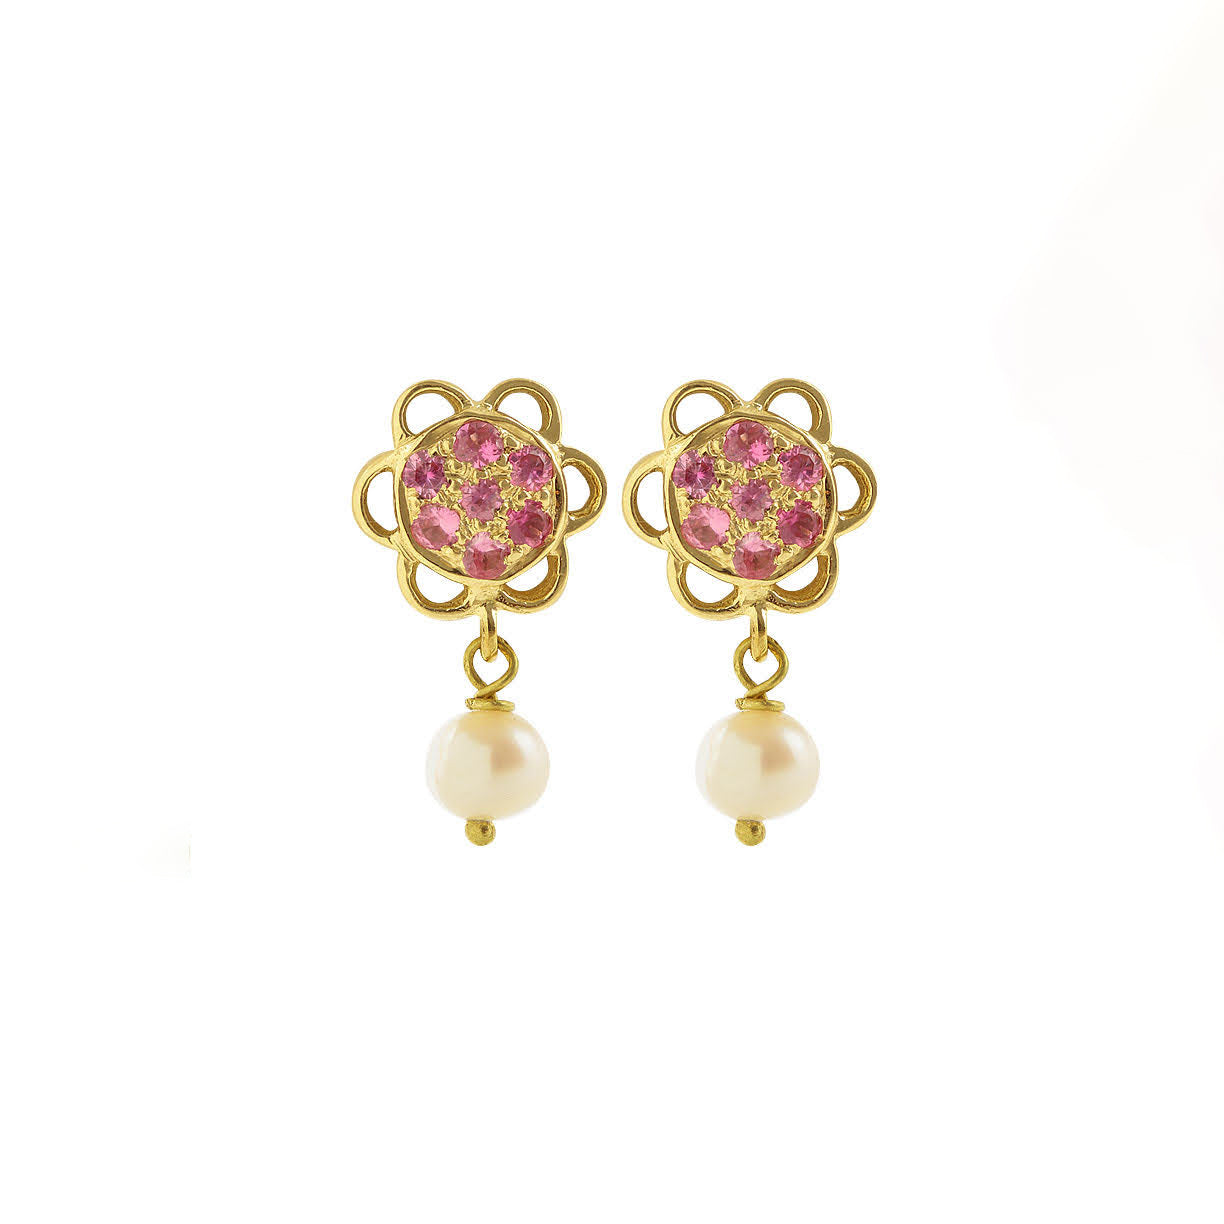 The Babyrasa Padmini Floral Gold, Pink Sapphire and Pearl Ear Studs by Rasvihar